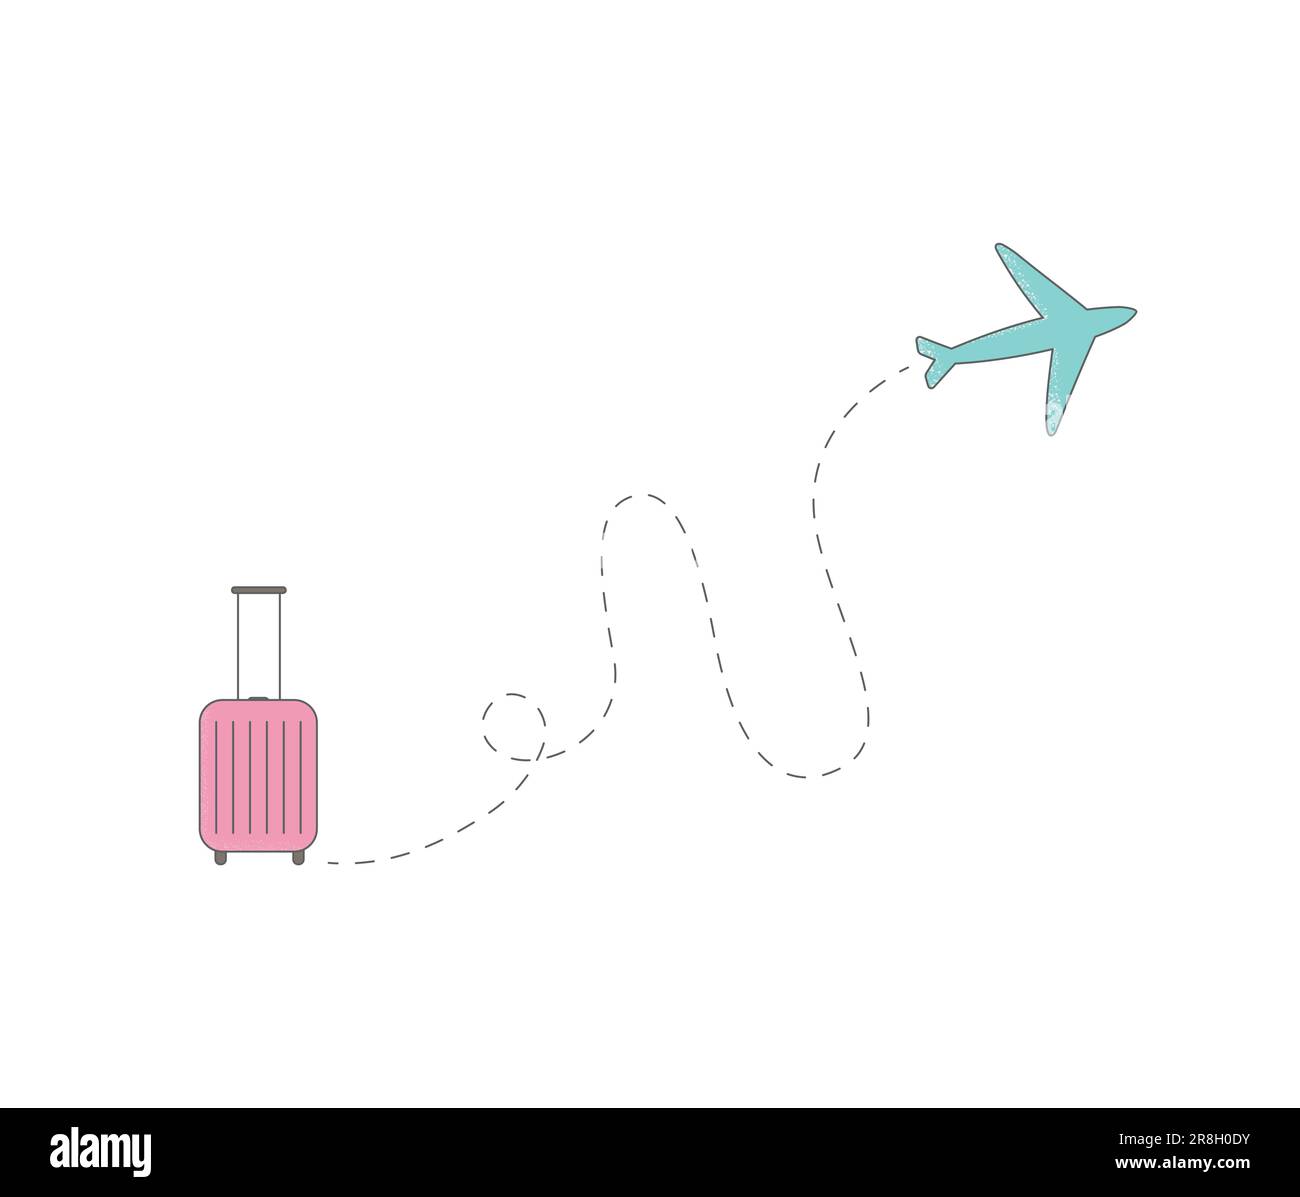 Vector airplane dotted path flight route, aircraft tracking icon. Stock Vector